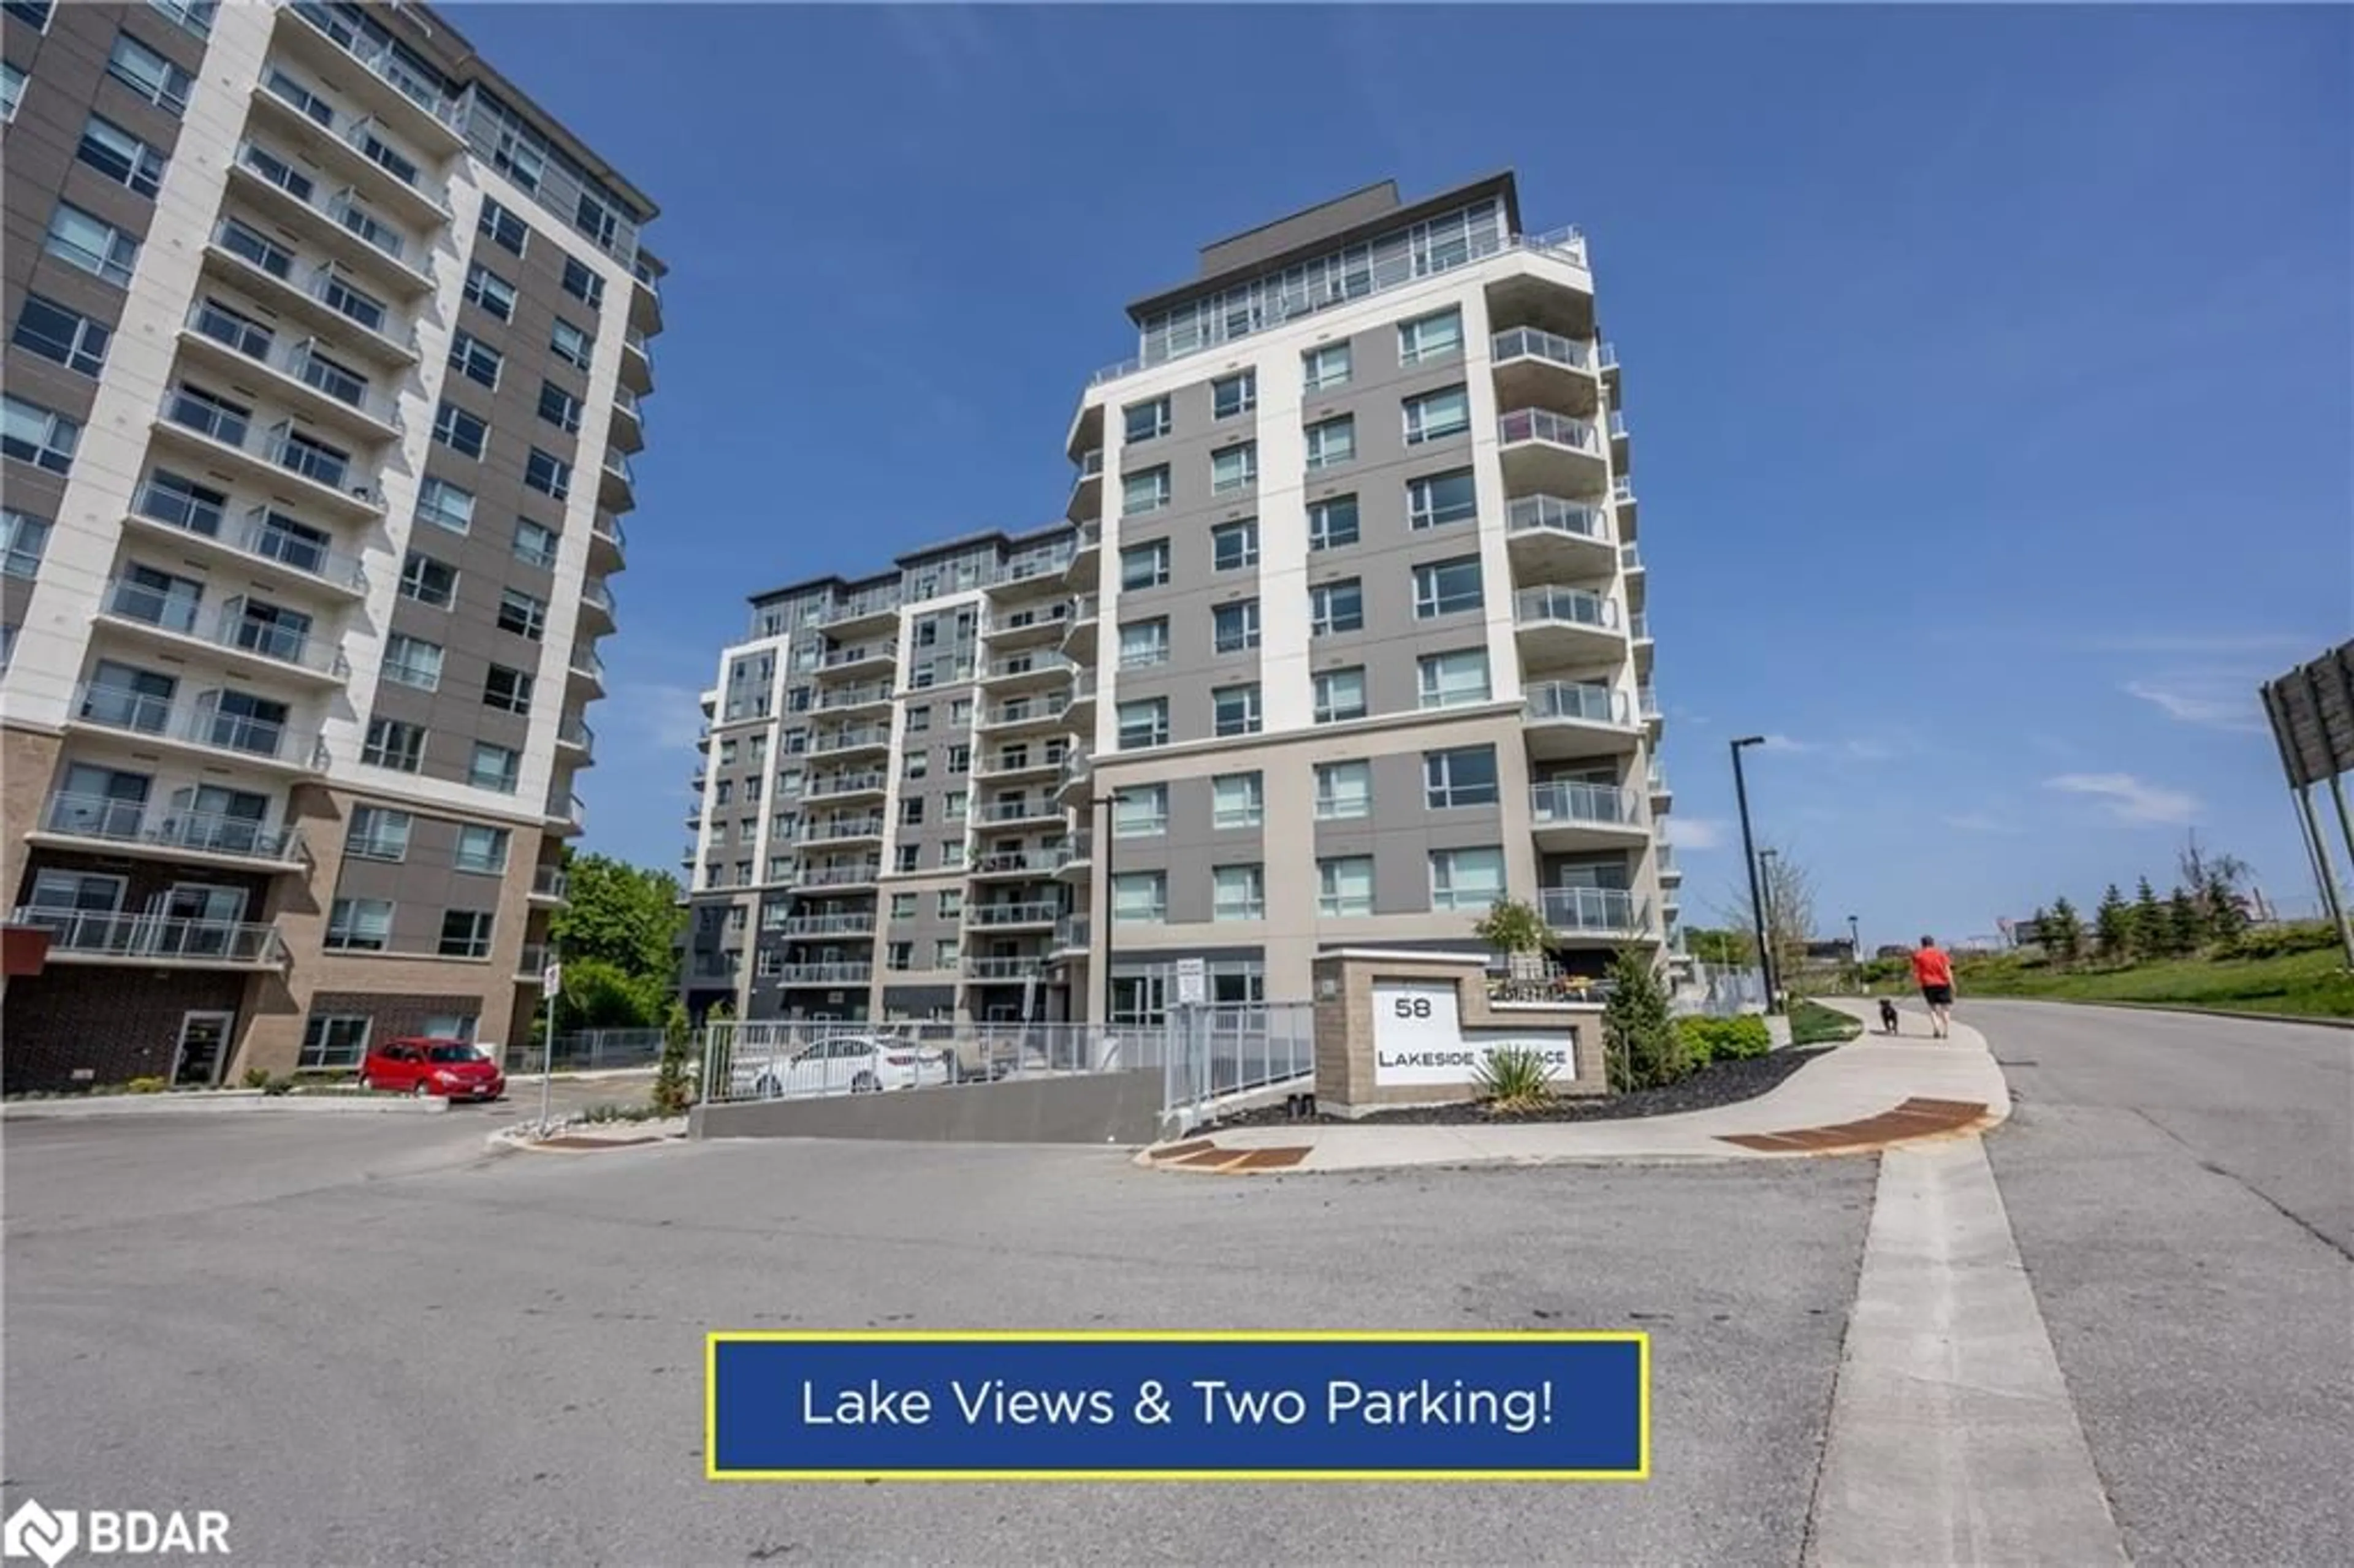 Lakeview for 58 Lakeside Terr #1018, Barrie Ontario L4M 7B9